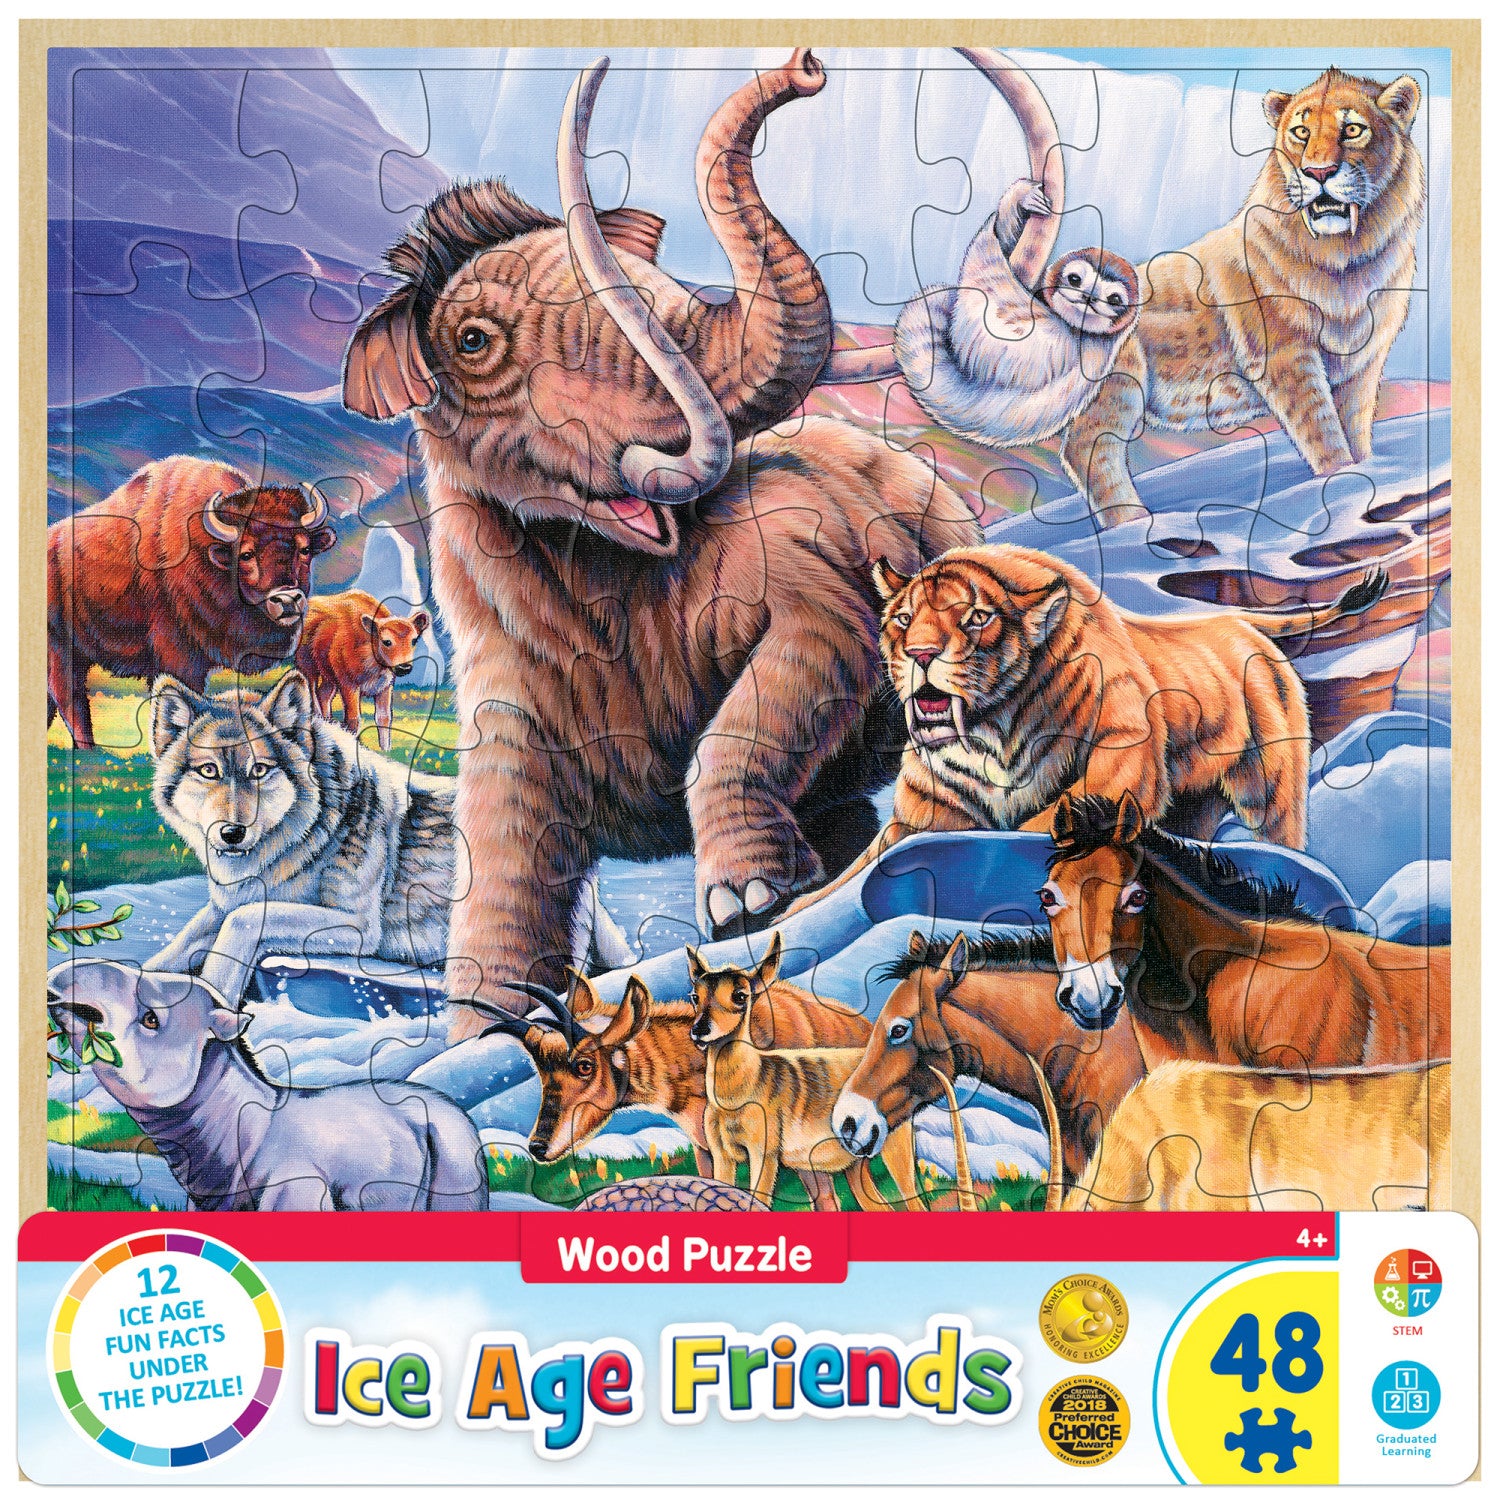 Wood Fun Facts - Ice Age Friends 48 Piece Wood Puzzle